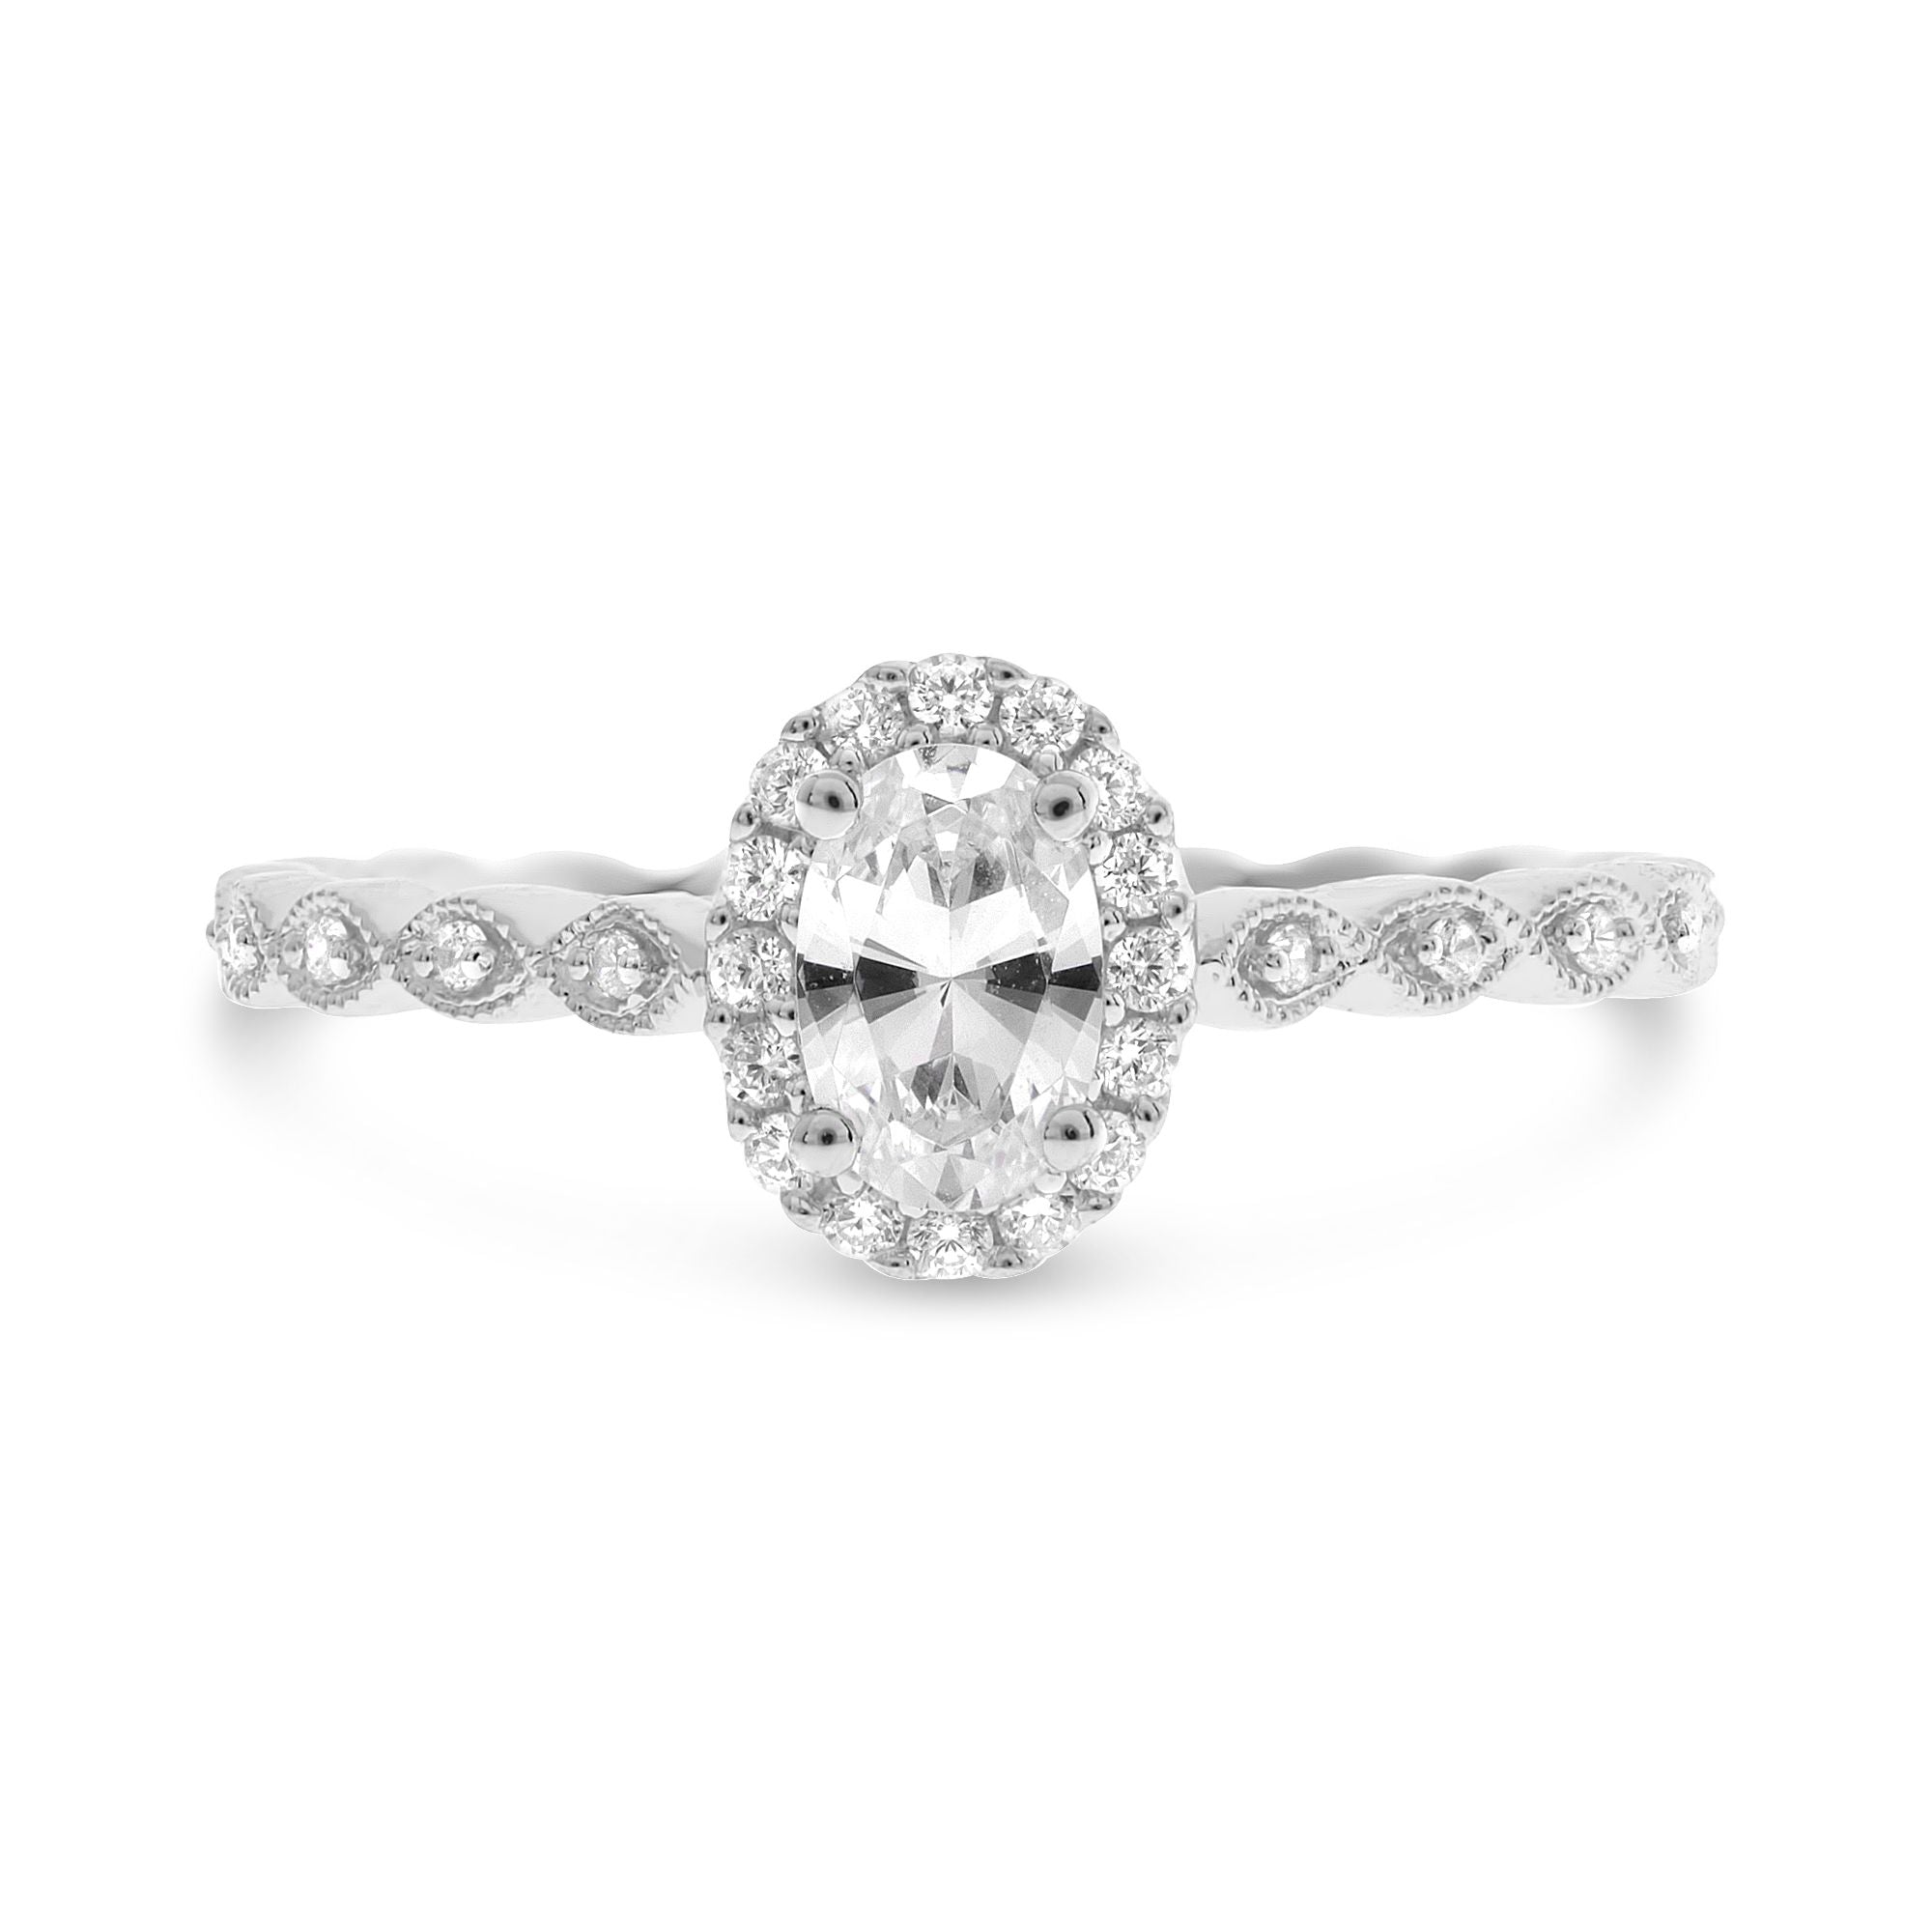 Diamond Oval Halo Engagement Ring Setting with Detailed Shank